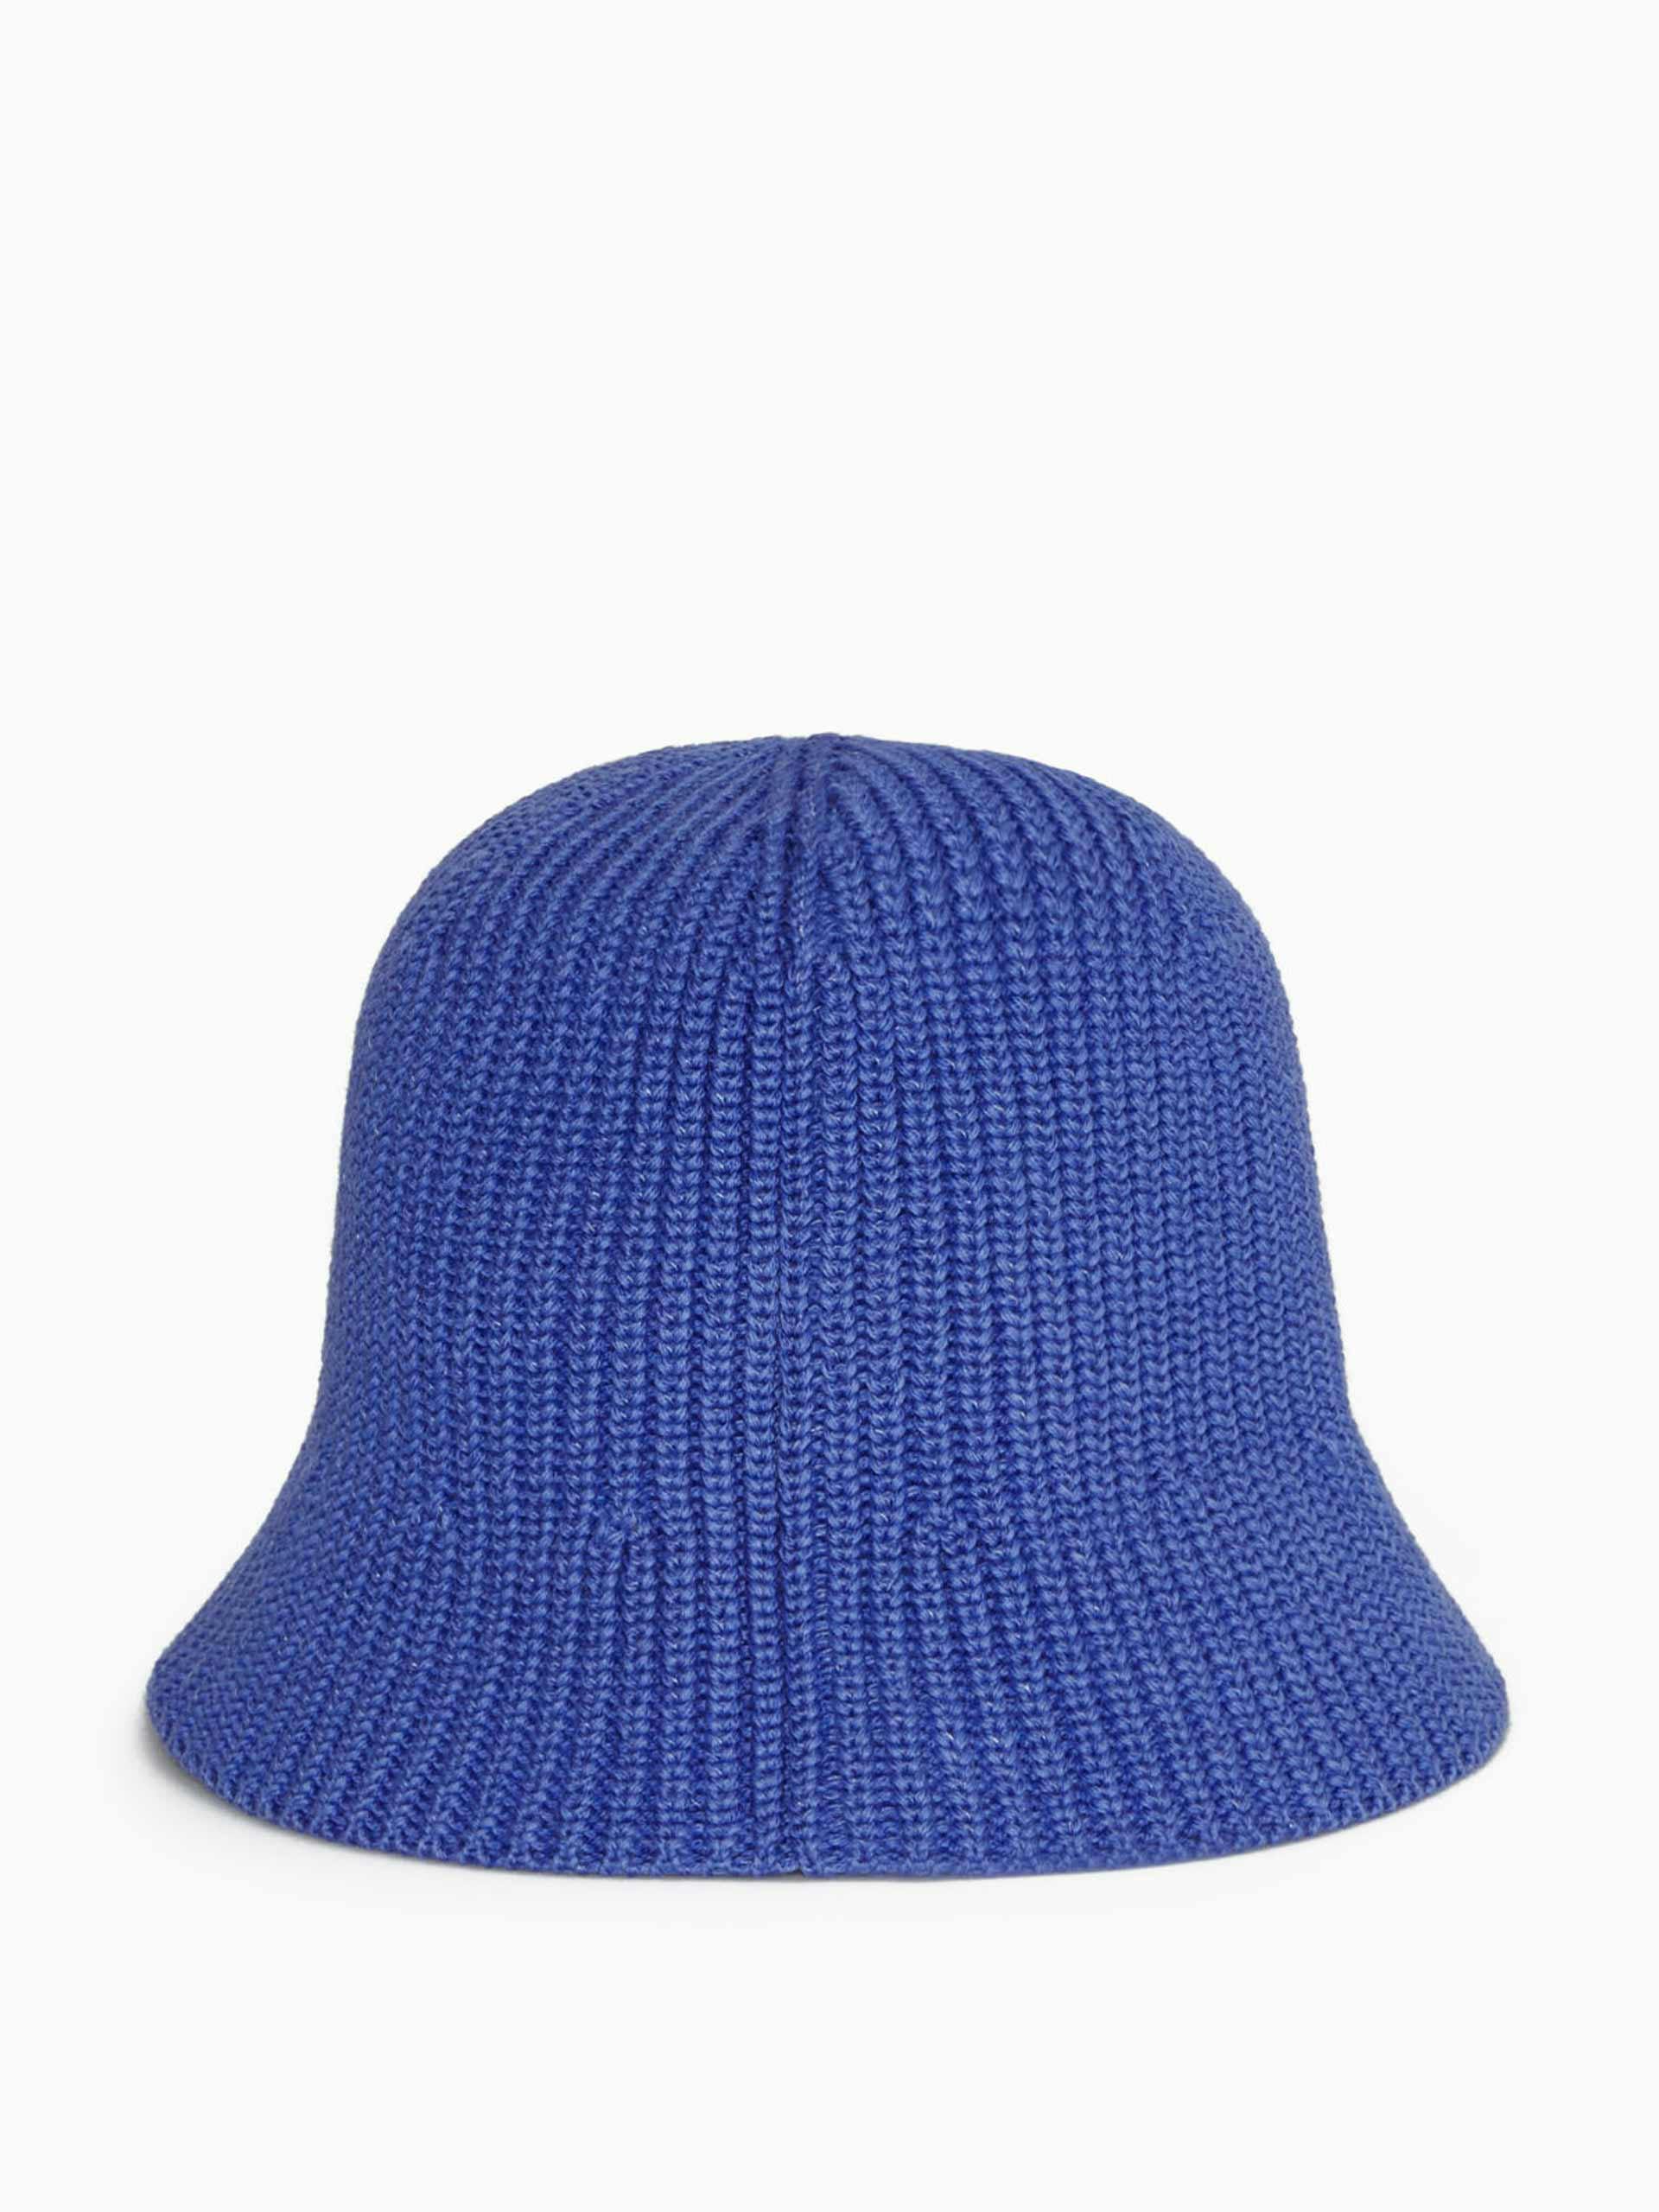 Blue knitted bucket hat